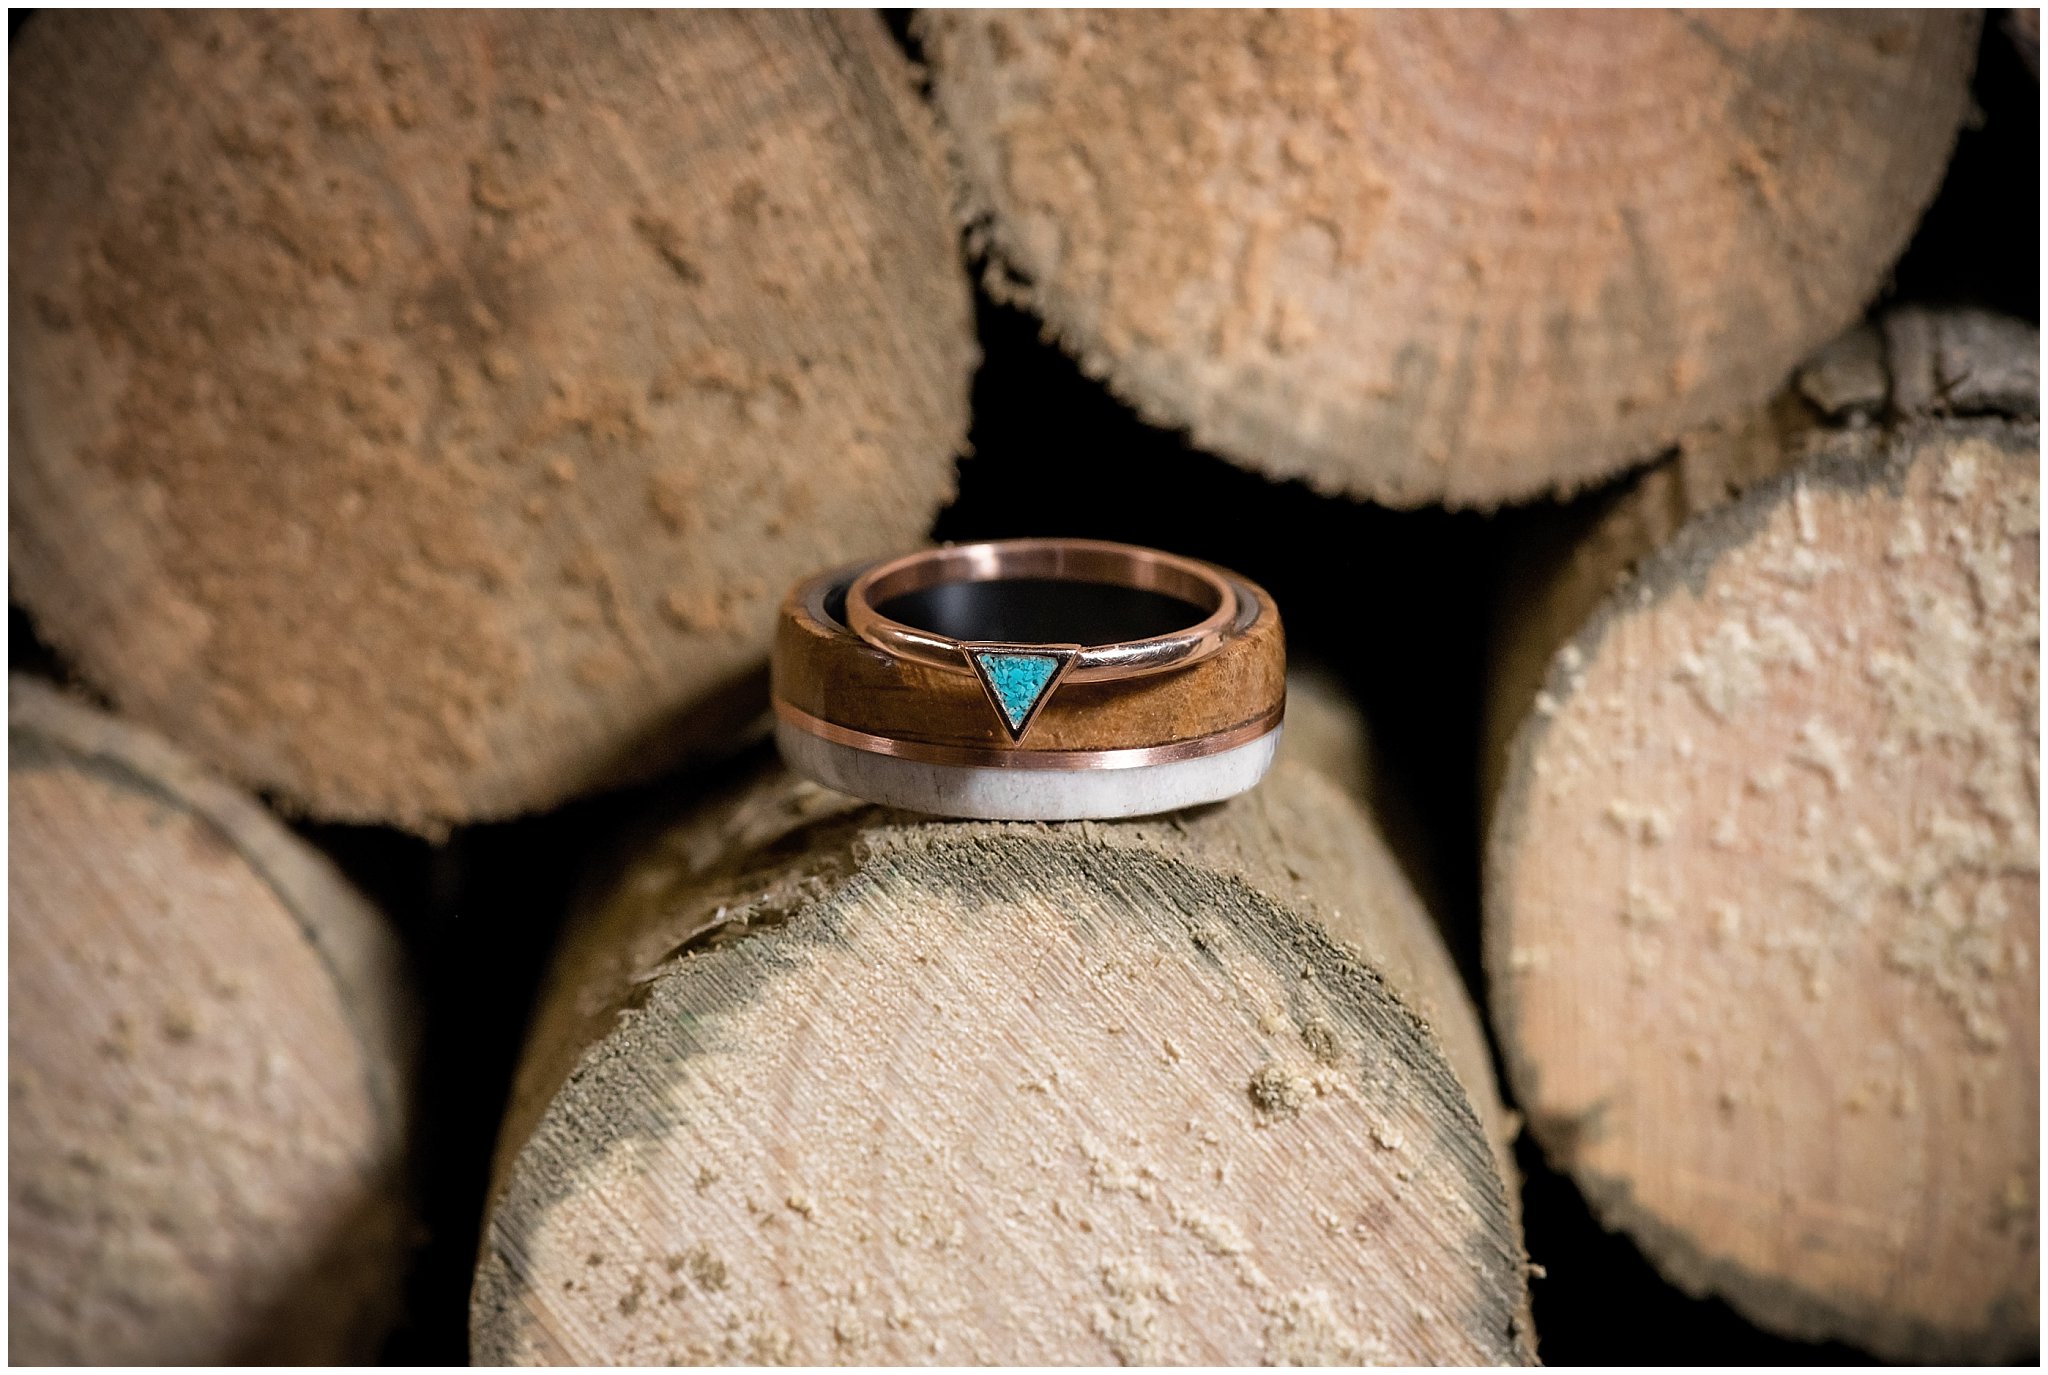 Custom wedding and engagement rings based out of Ogden, Utah. Photographed by Jessie and Dallin Photography